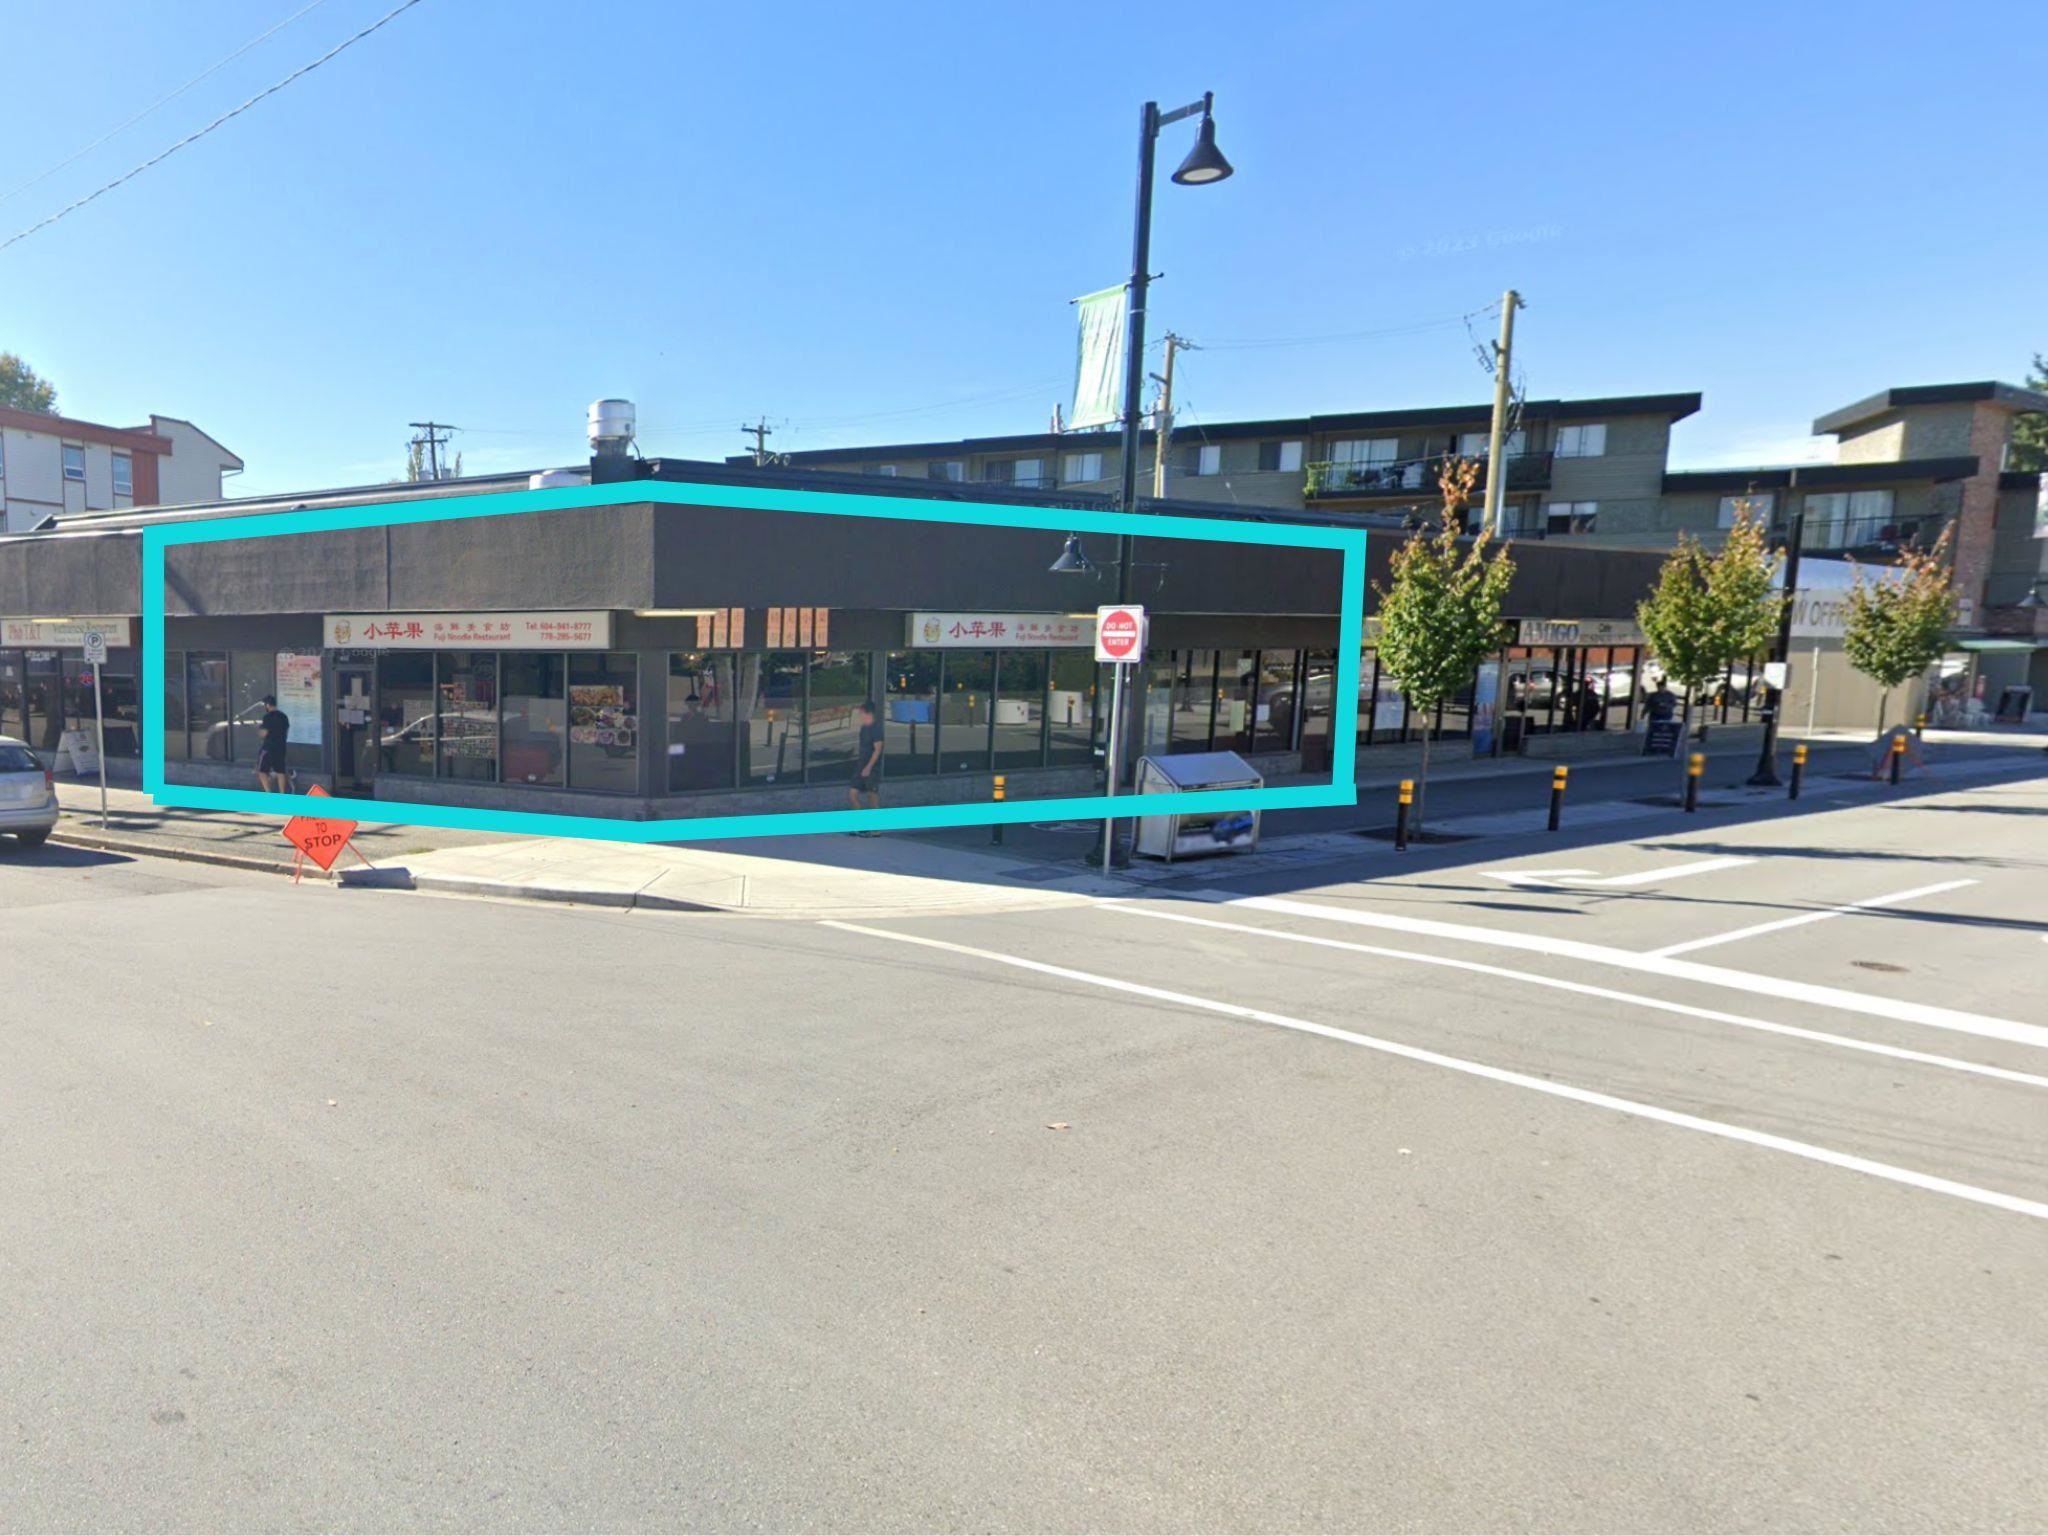 Central Pt Coquitlam Land Commercial for sale:    (Listed 6800-05-12)